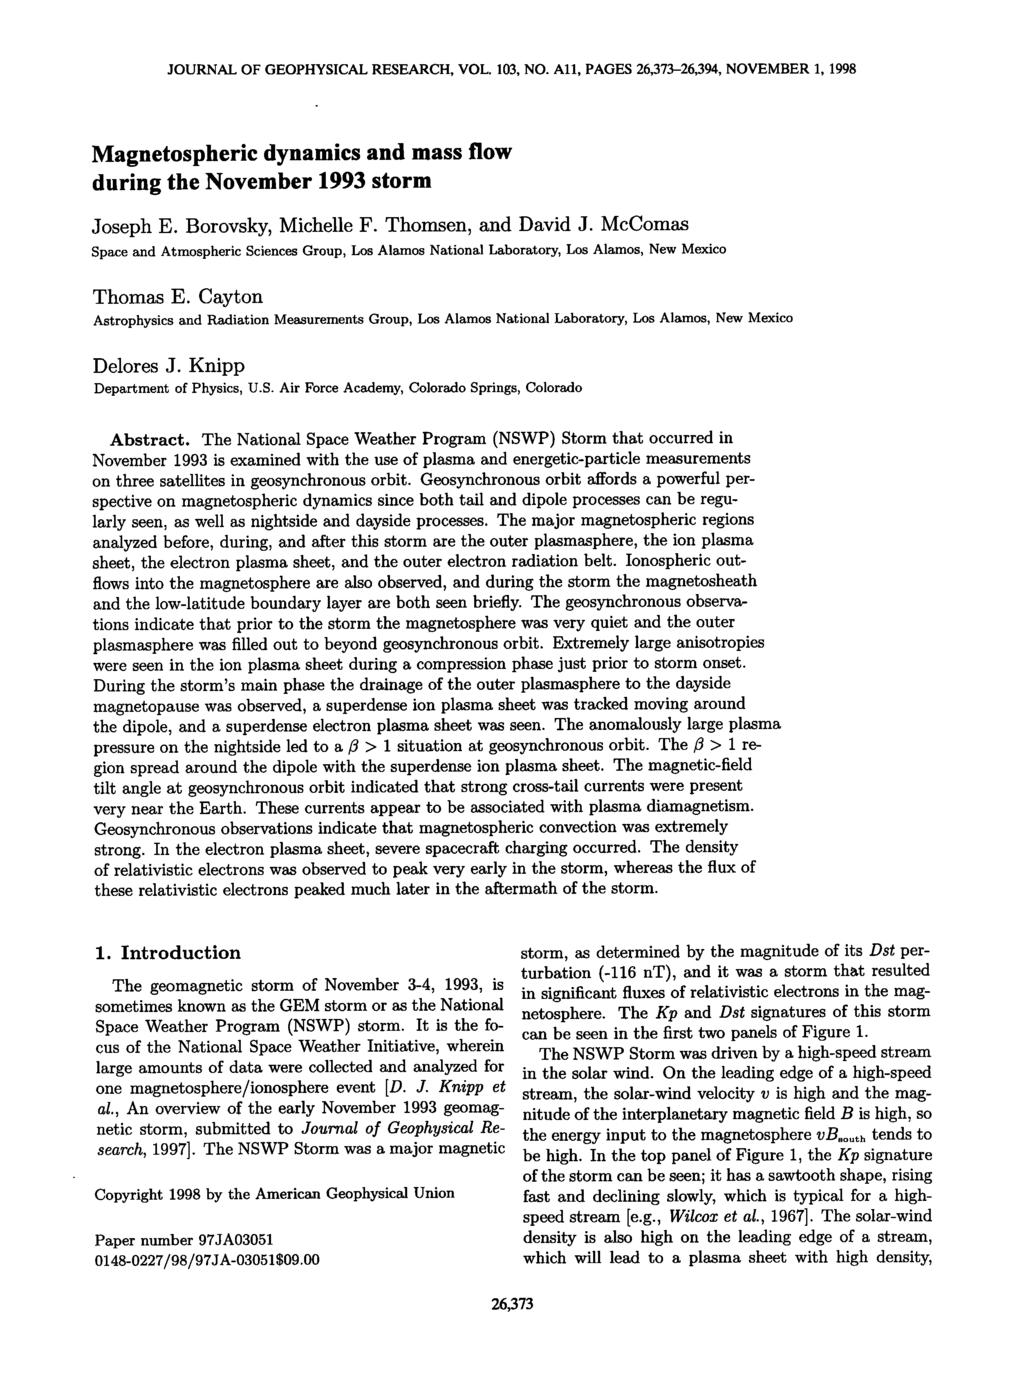 JOURNAL OF GEOPHYSICAL RESEARCH, VOL 103, NO All, PAGES 26,373-26,394, NOVEMBER 1, 1998 Magnetospheric dynamics and mass flow during the November 1993 storm Joseph E Borovsky, Michelle F Thomsen, and